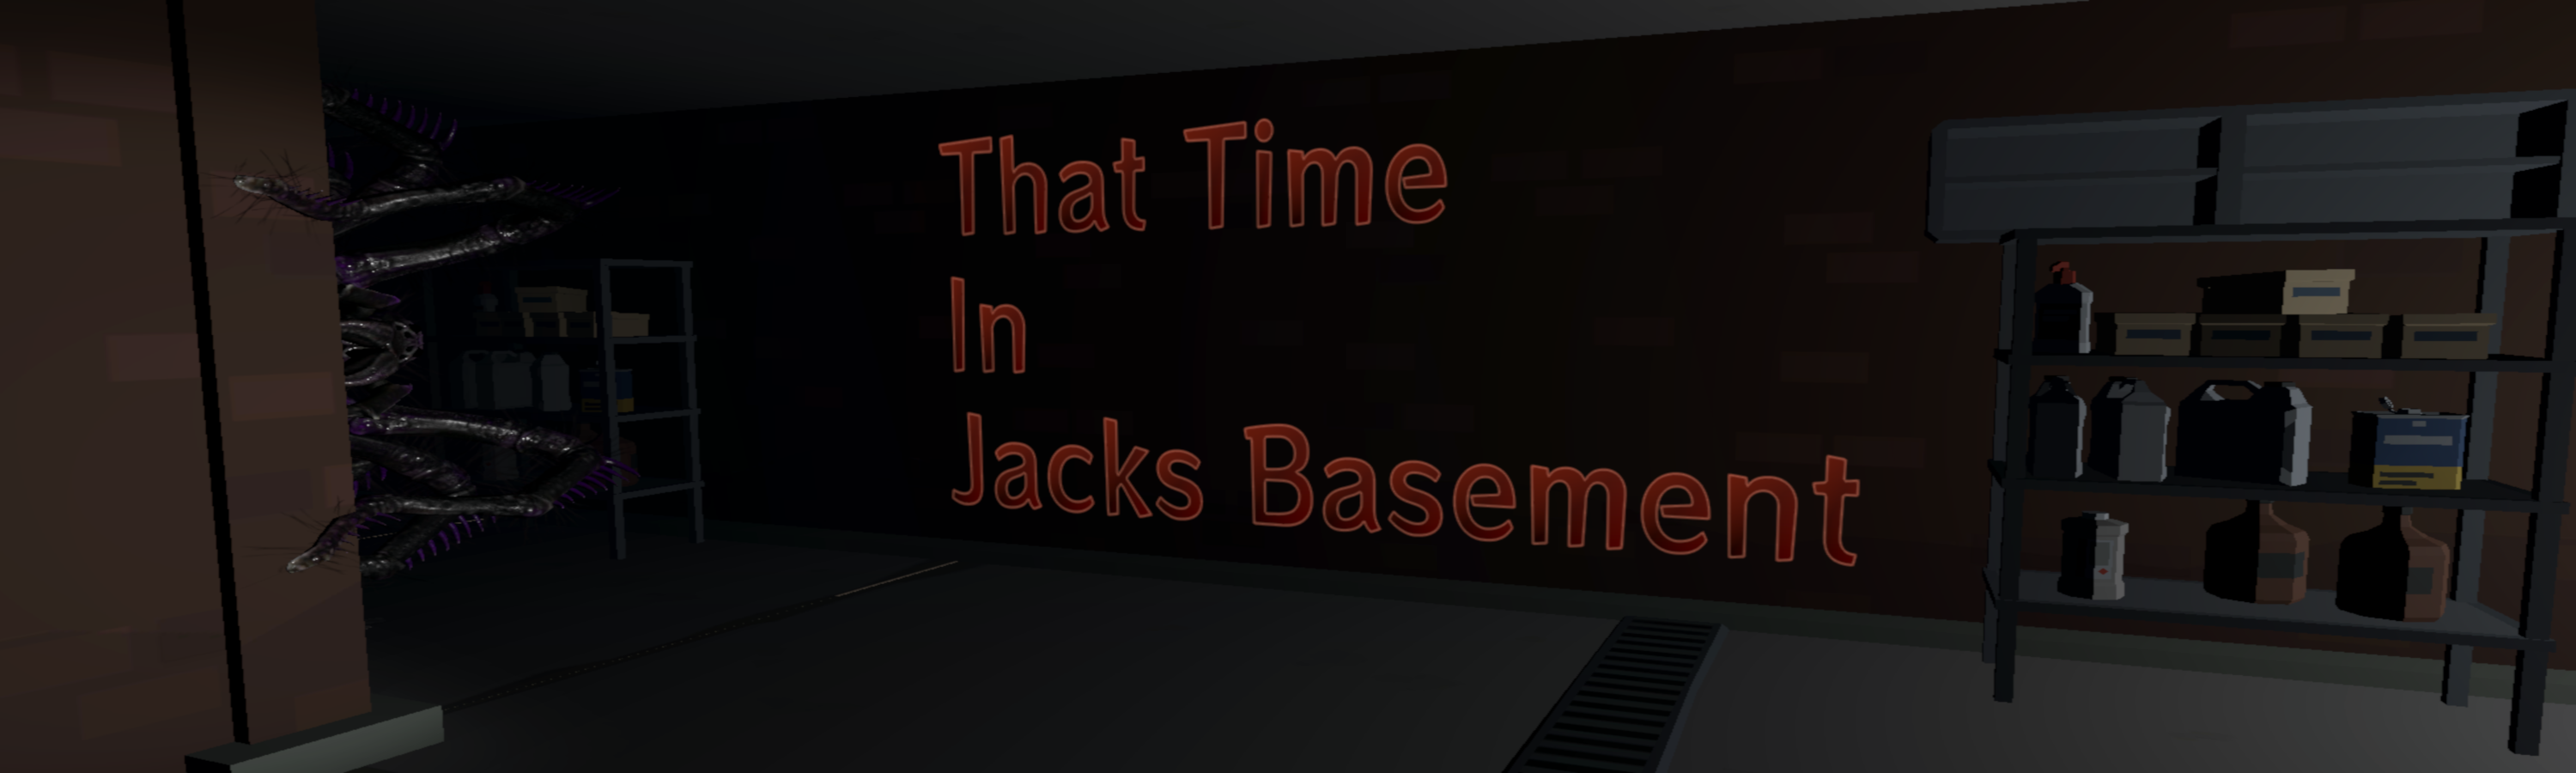 That Time in Jack's Basement